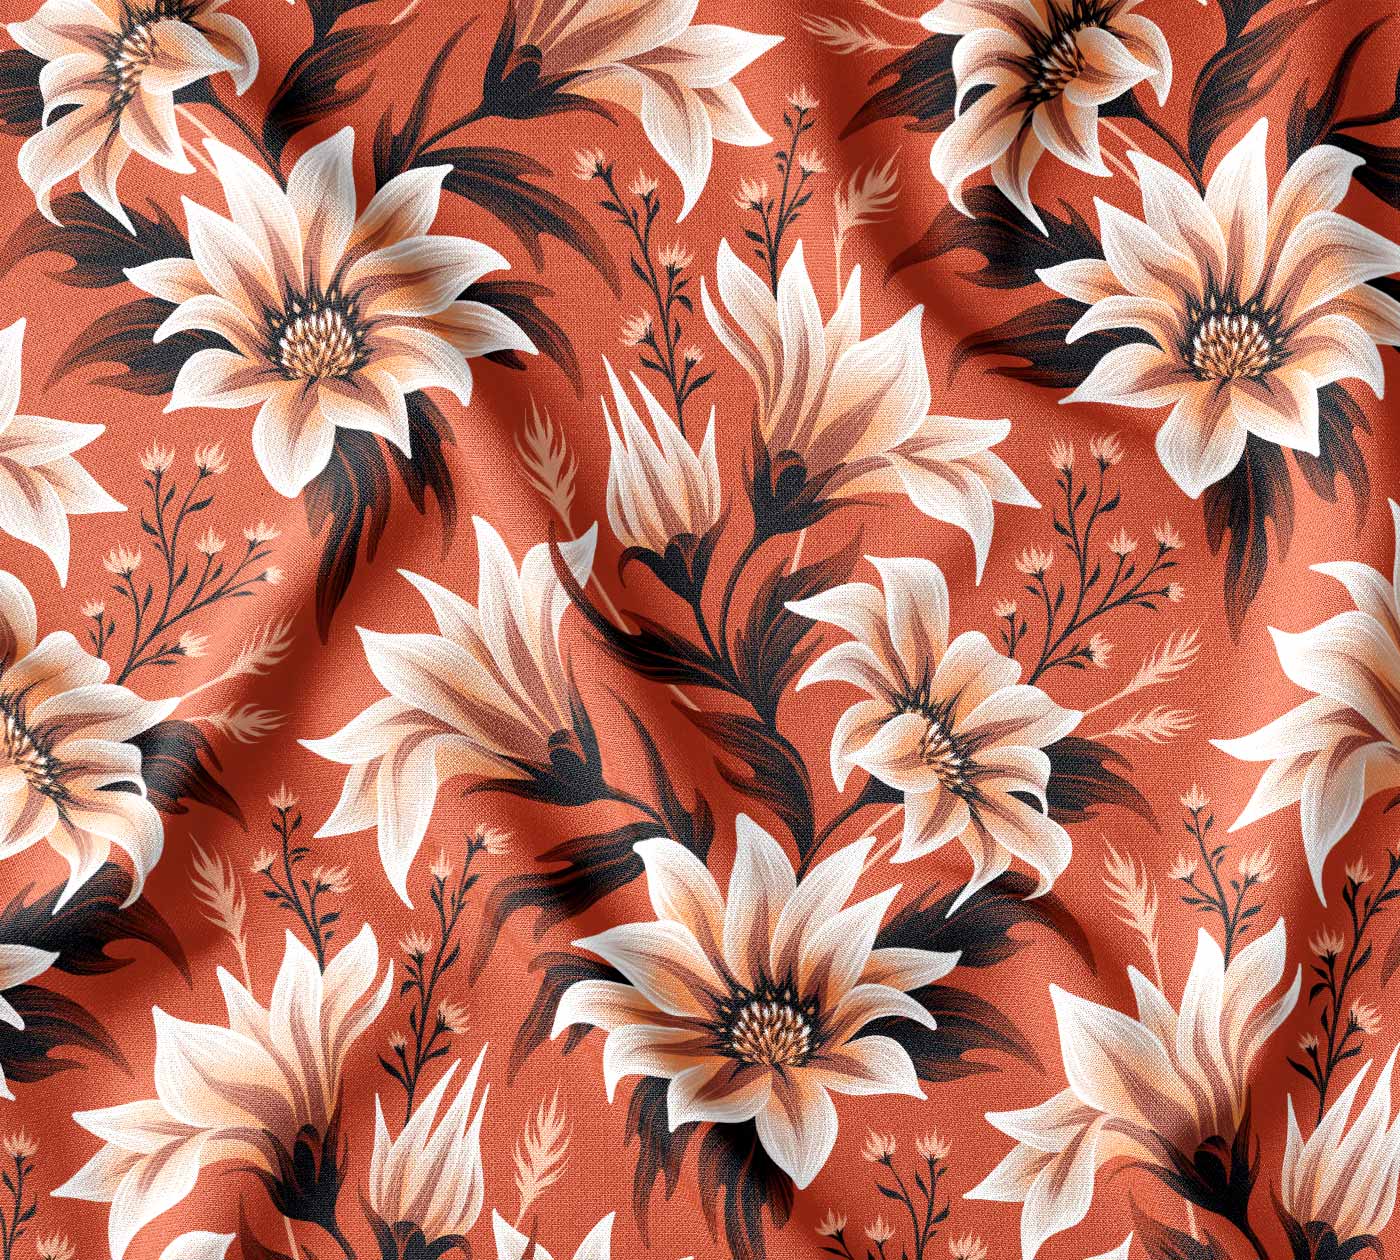 Gazania floral burnt orange patterned fabric by Andrea Muller